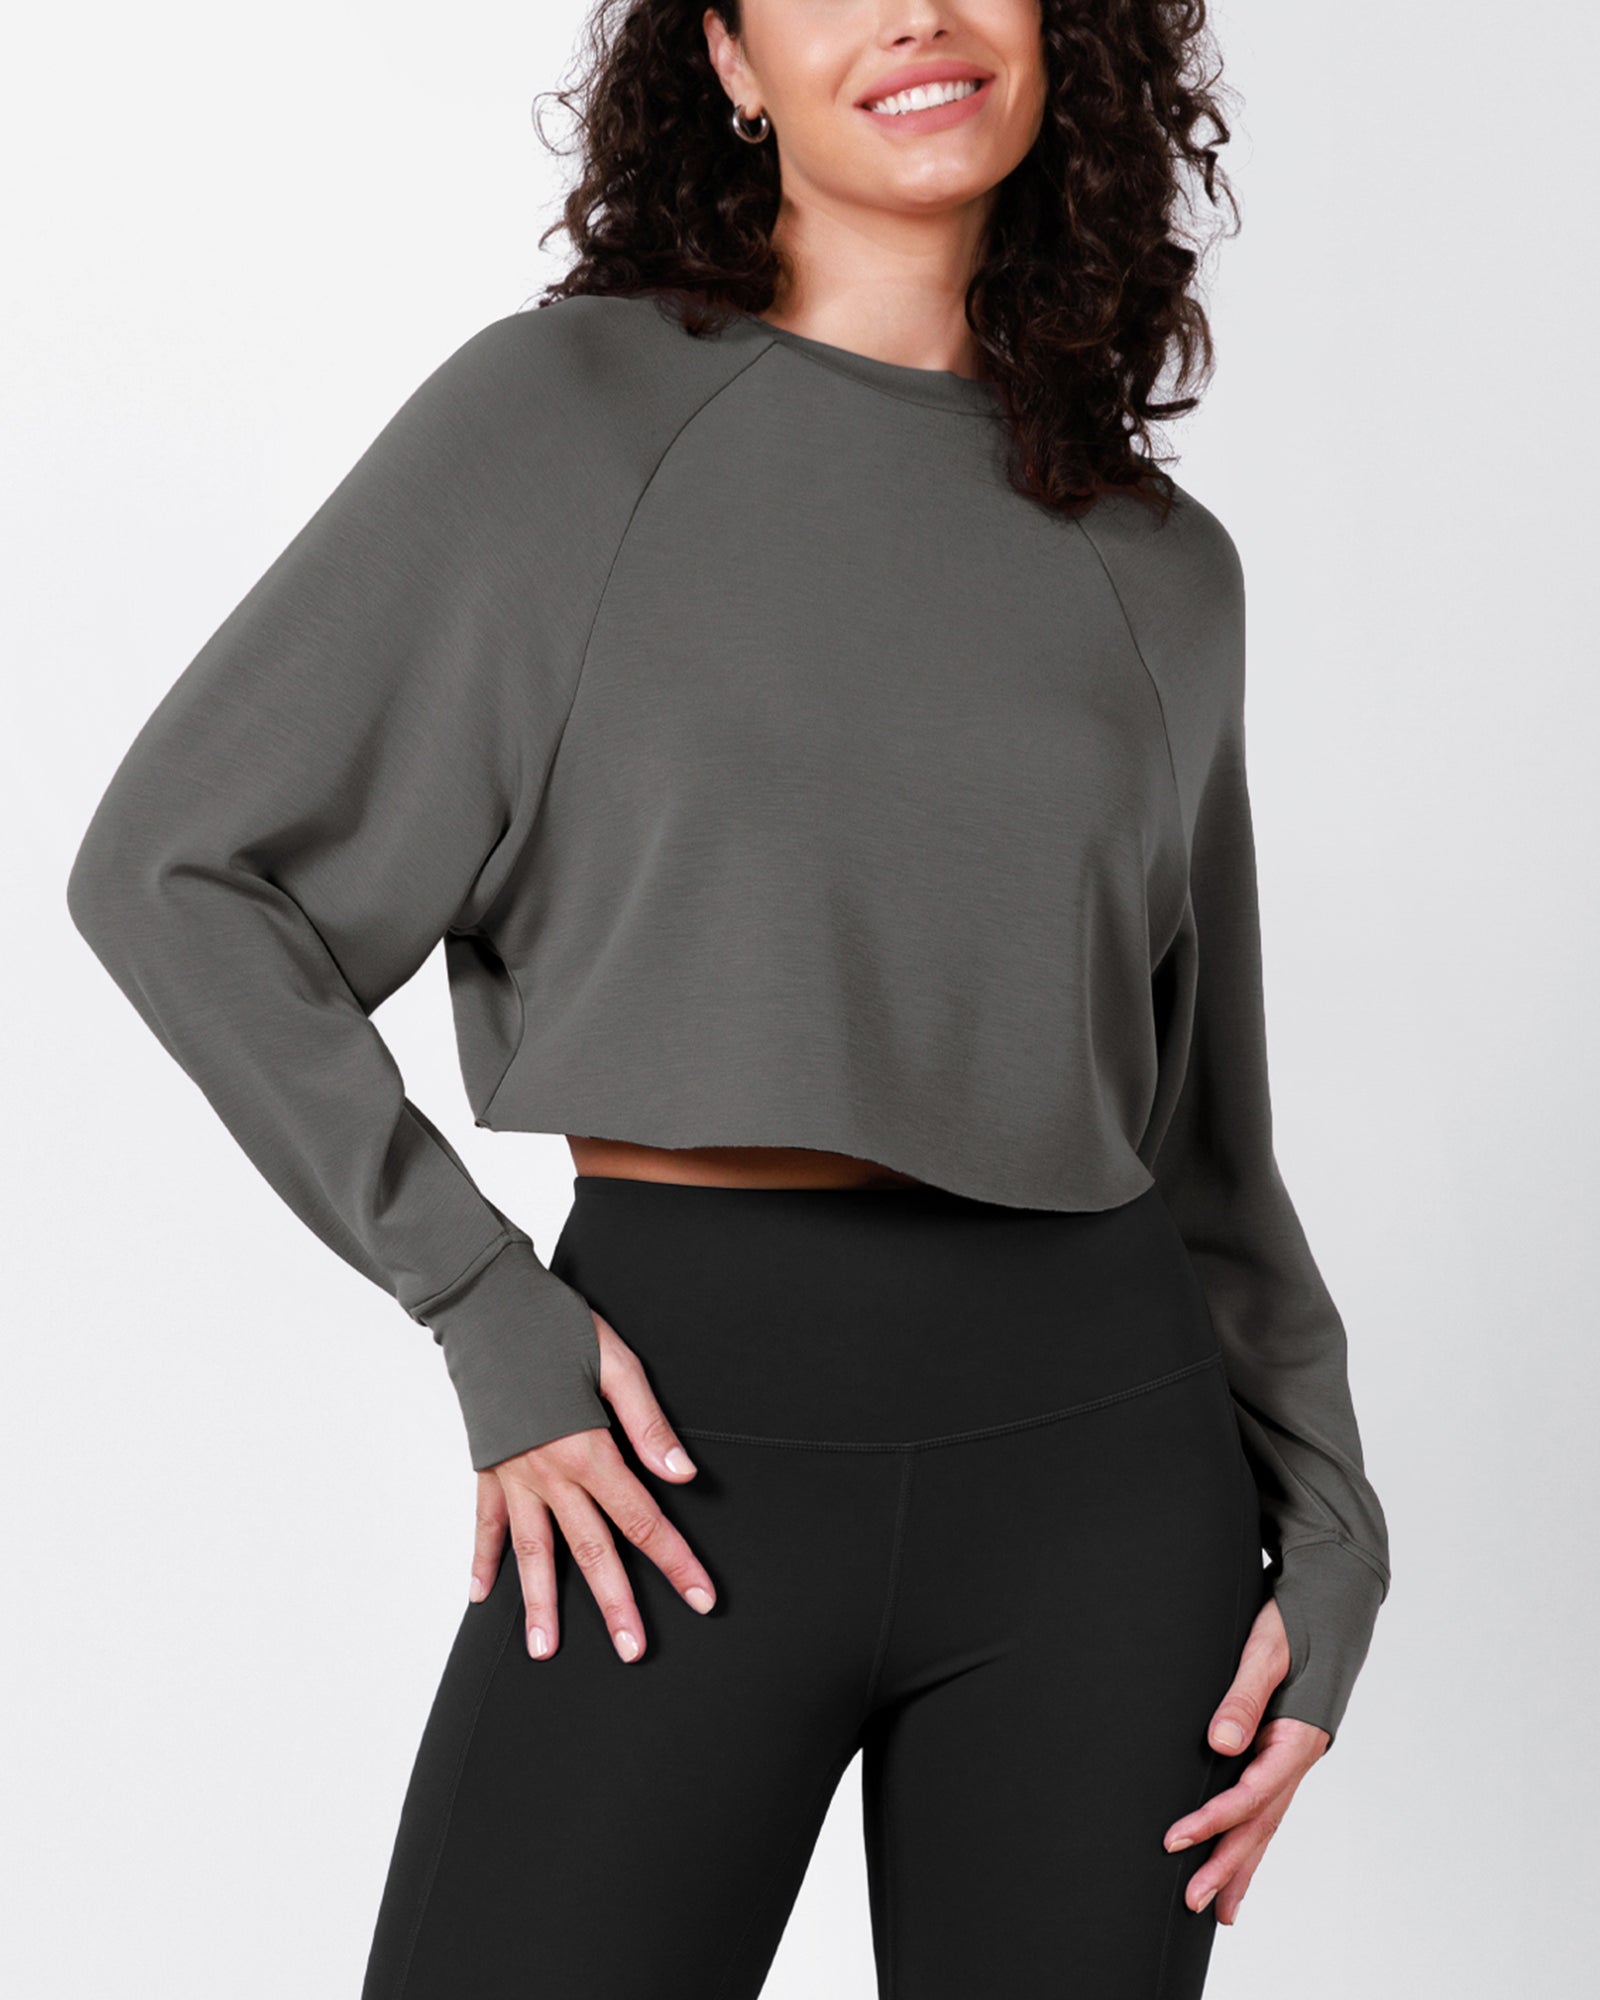 Modal Soft Long Sleeve Cropped Sweatshirts with Thumb Hole Charcoal - ododos